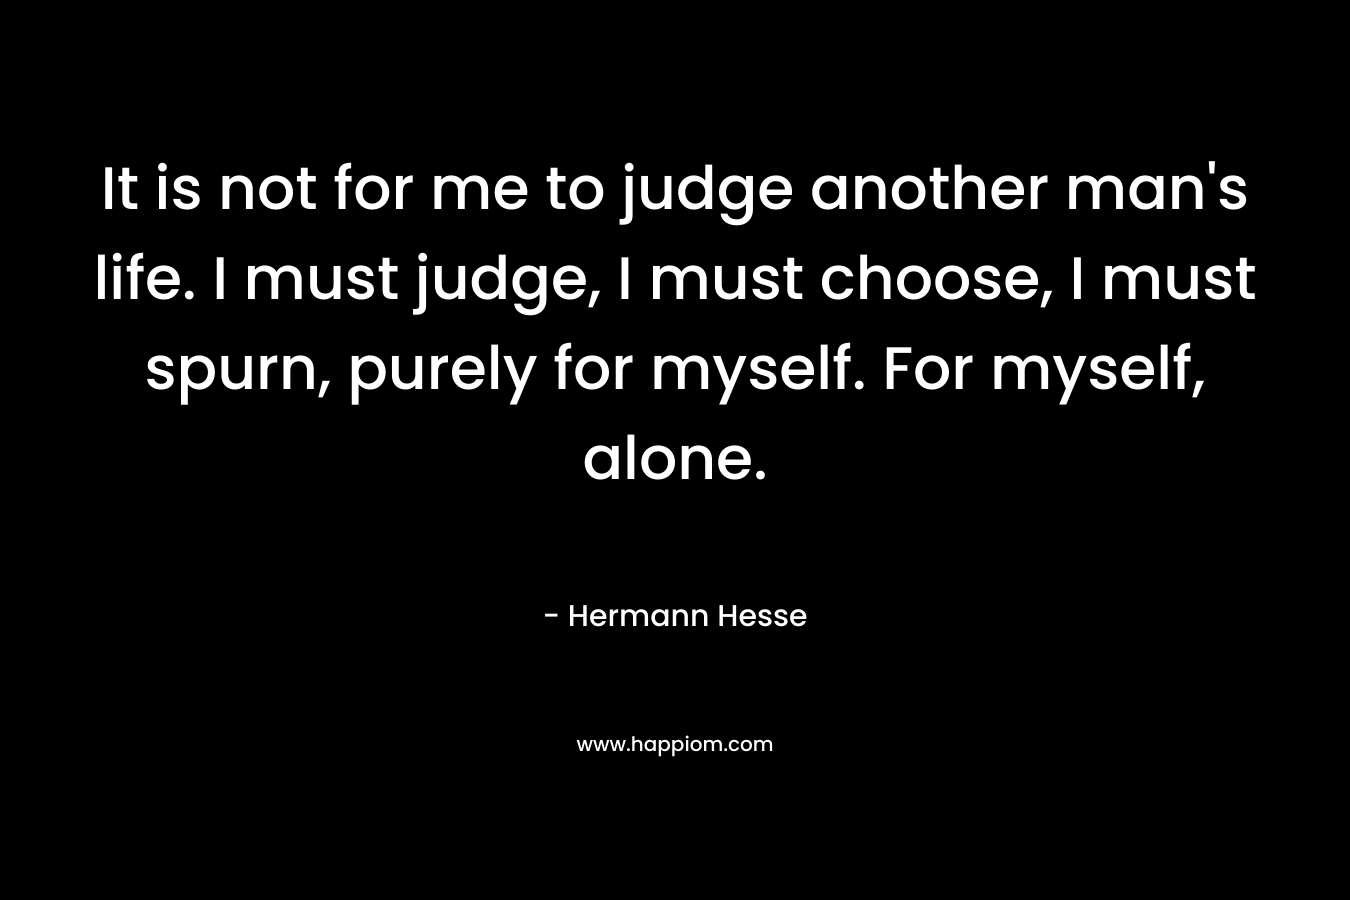 It is not for me to judge another man’s life. I must judge, I must choose, I must spurn, purely for myself. For myself, alone. – Hermann Hesse